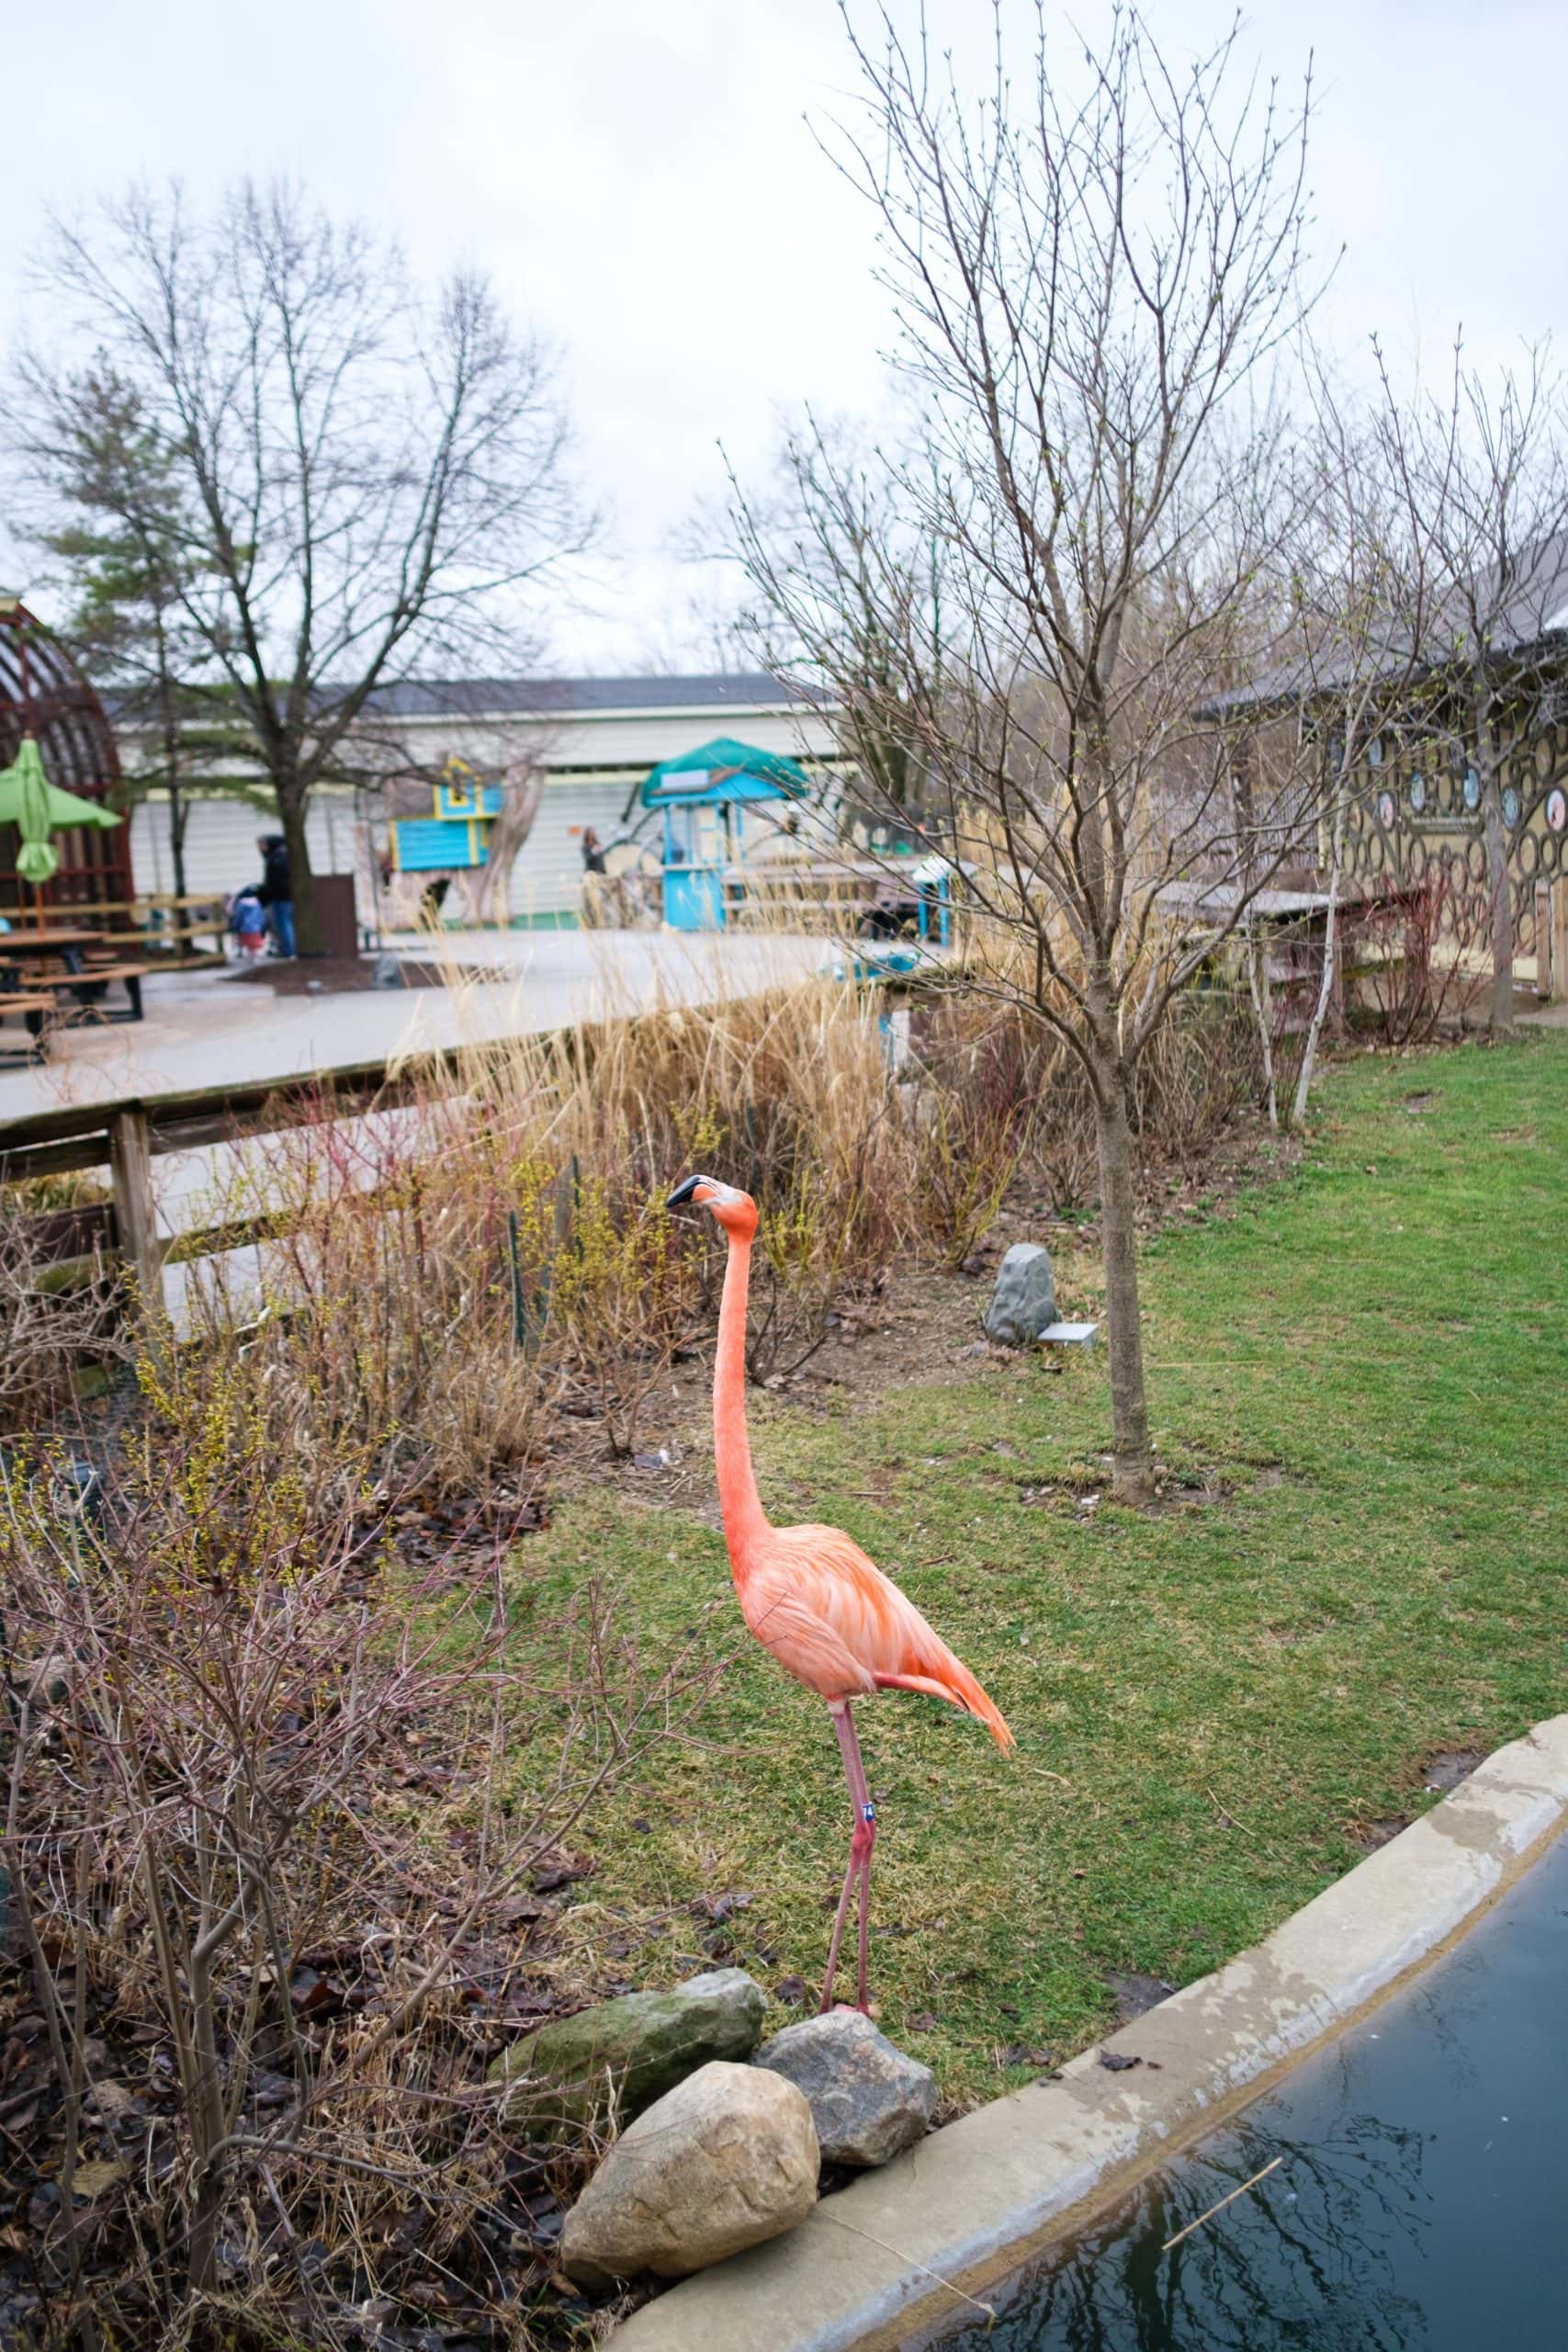 Very friendly flamingo outside inside the Indianapolis Zoo.